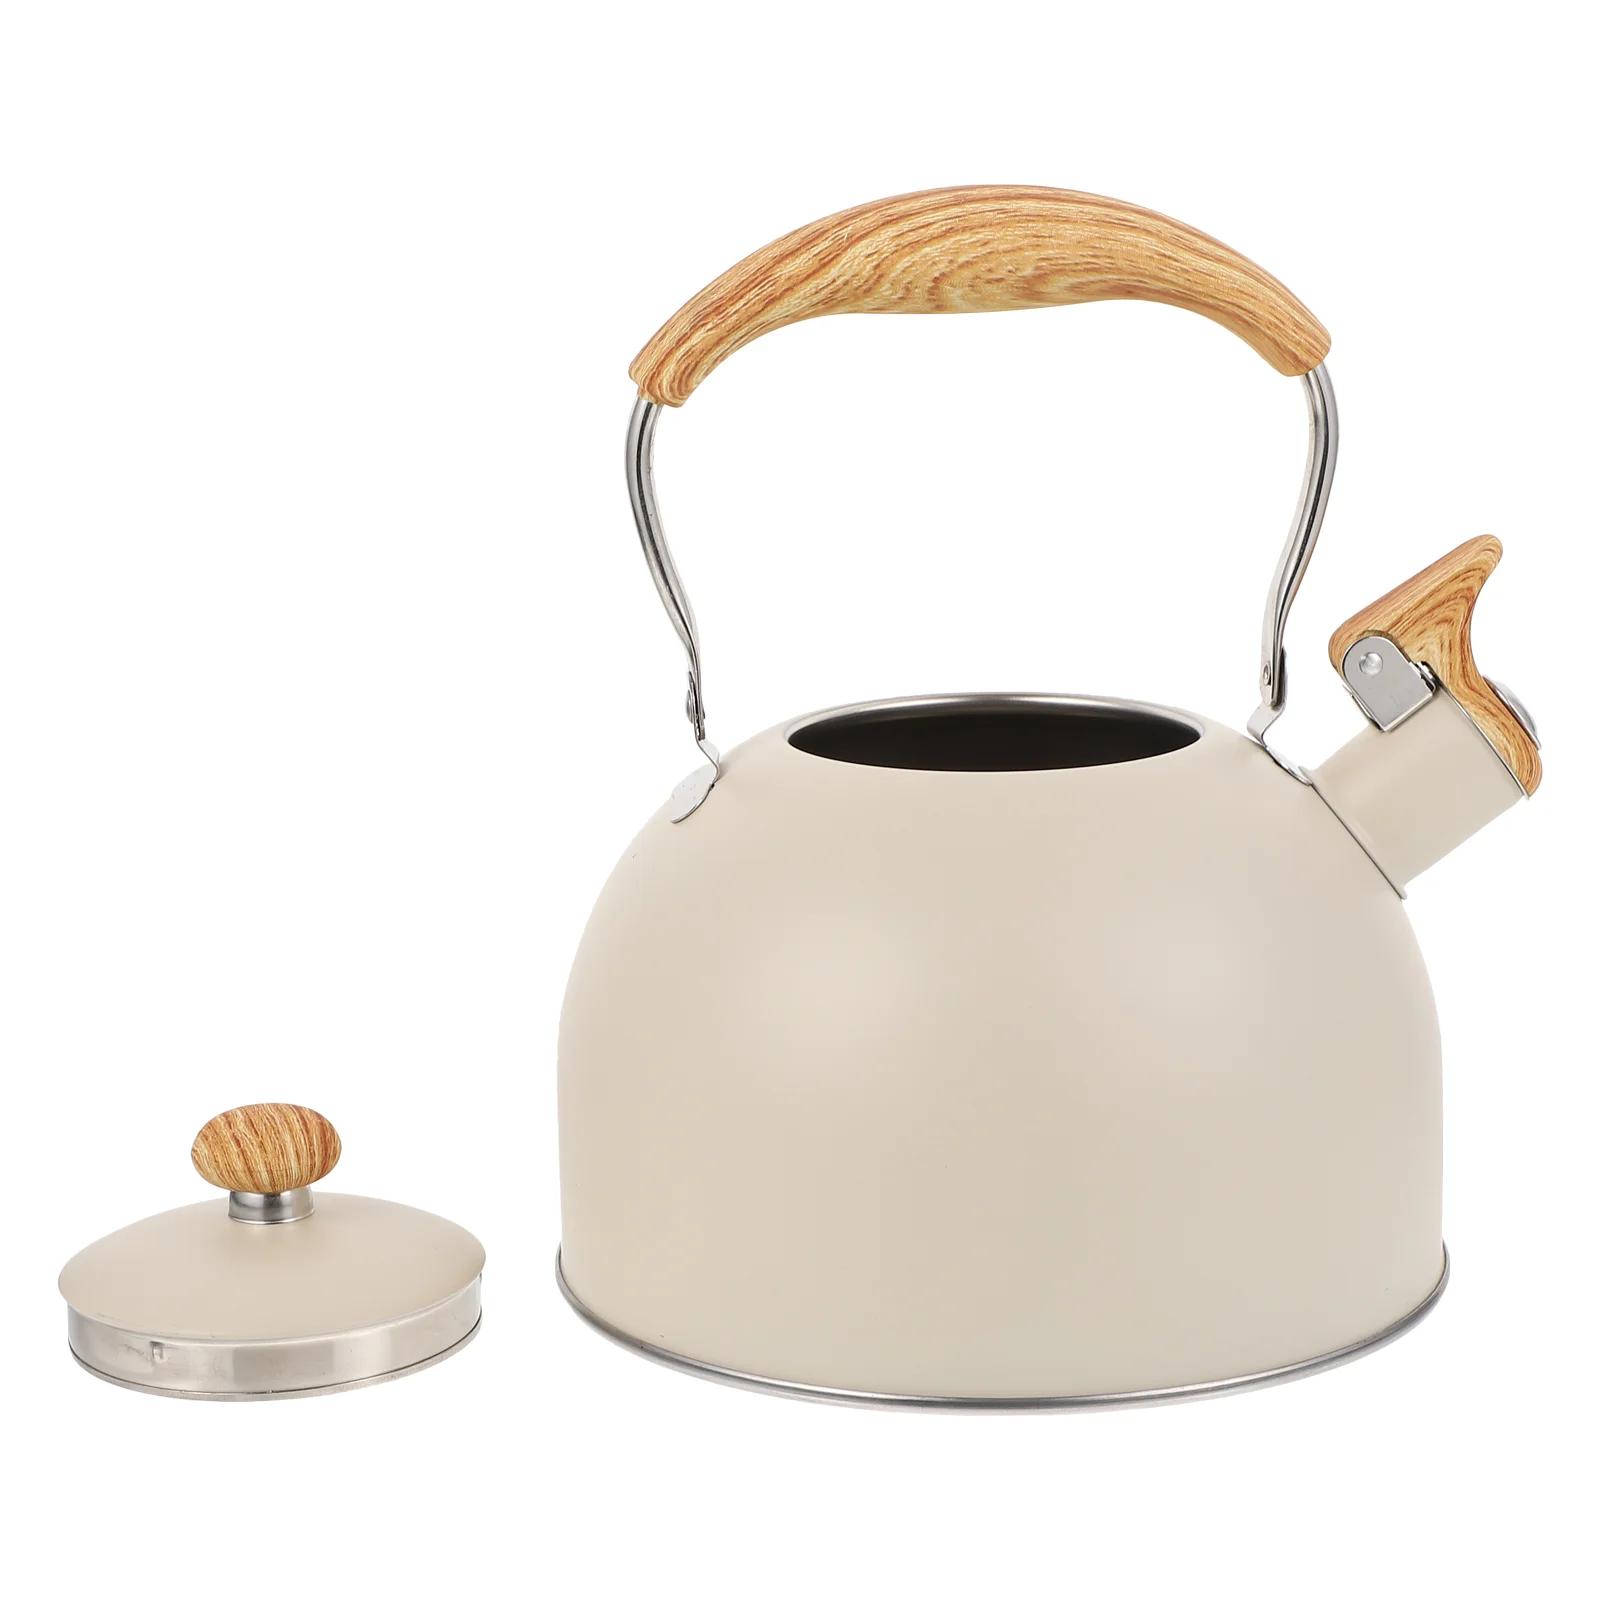 

Boiling Kettle Pot Stainless Steel Stovetop Metal Coffee Filter Whistling Teakettle Water Teapot Camping Cookware Hot